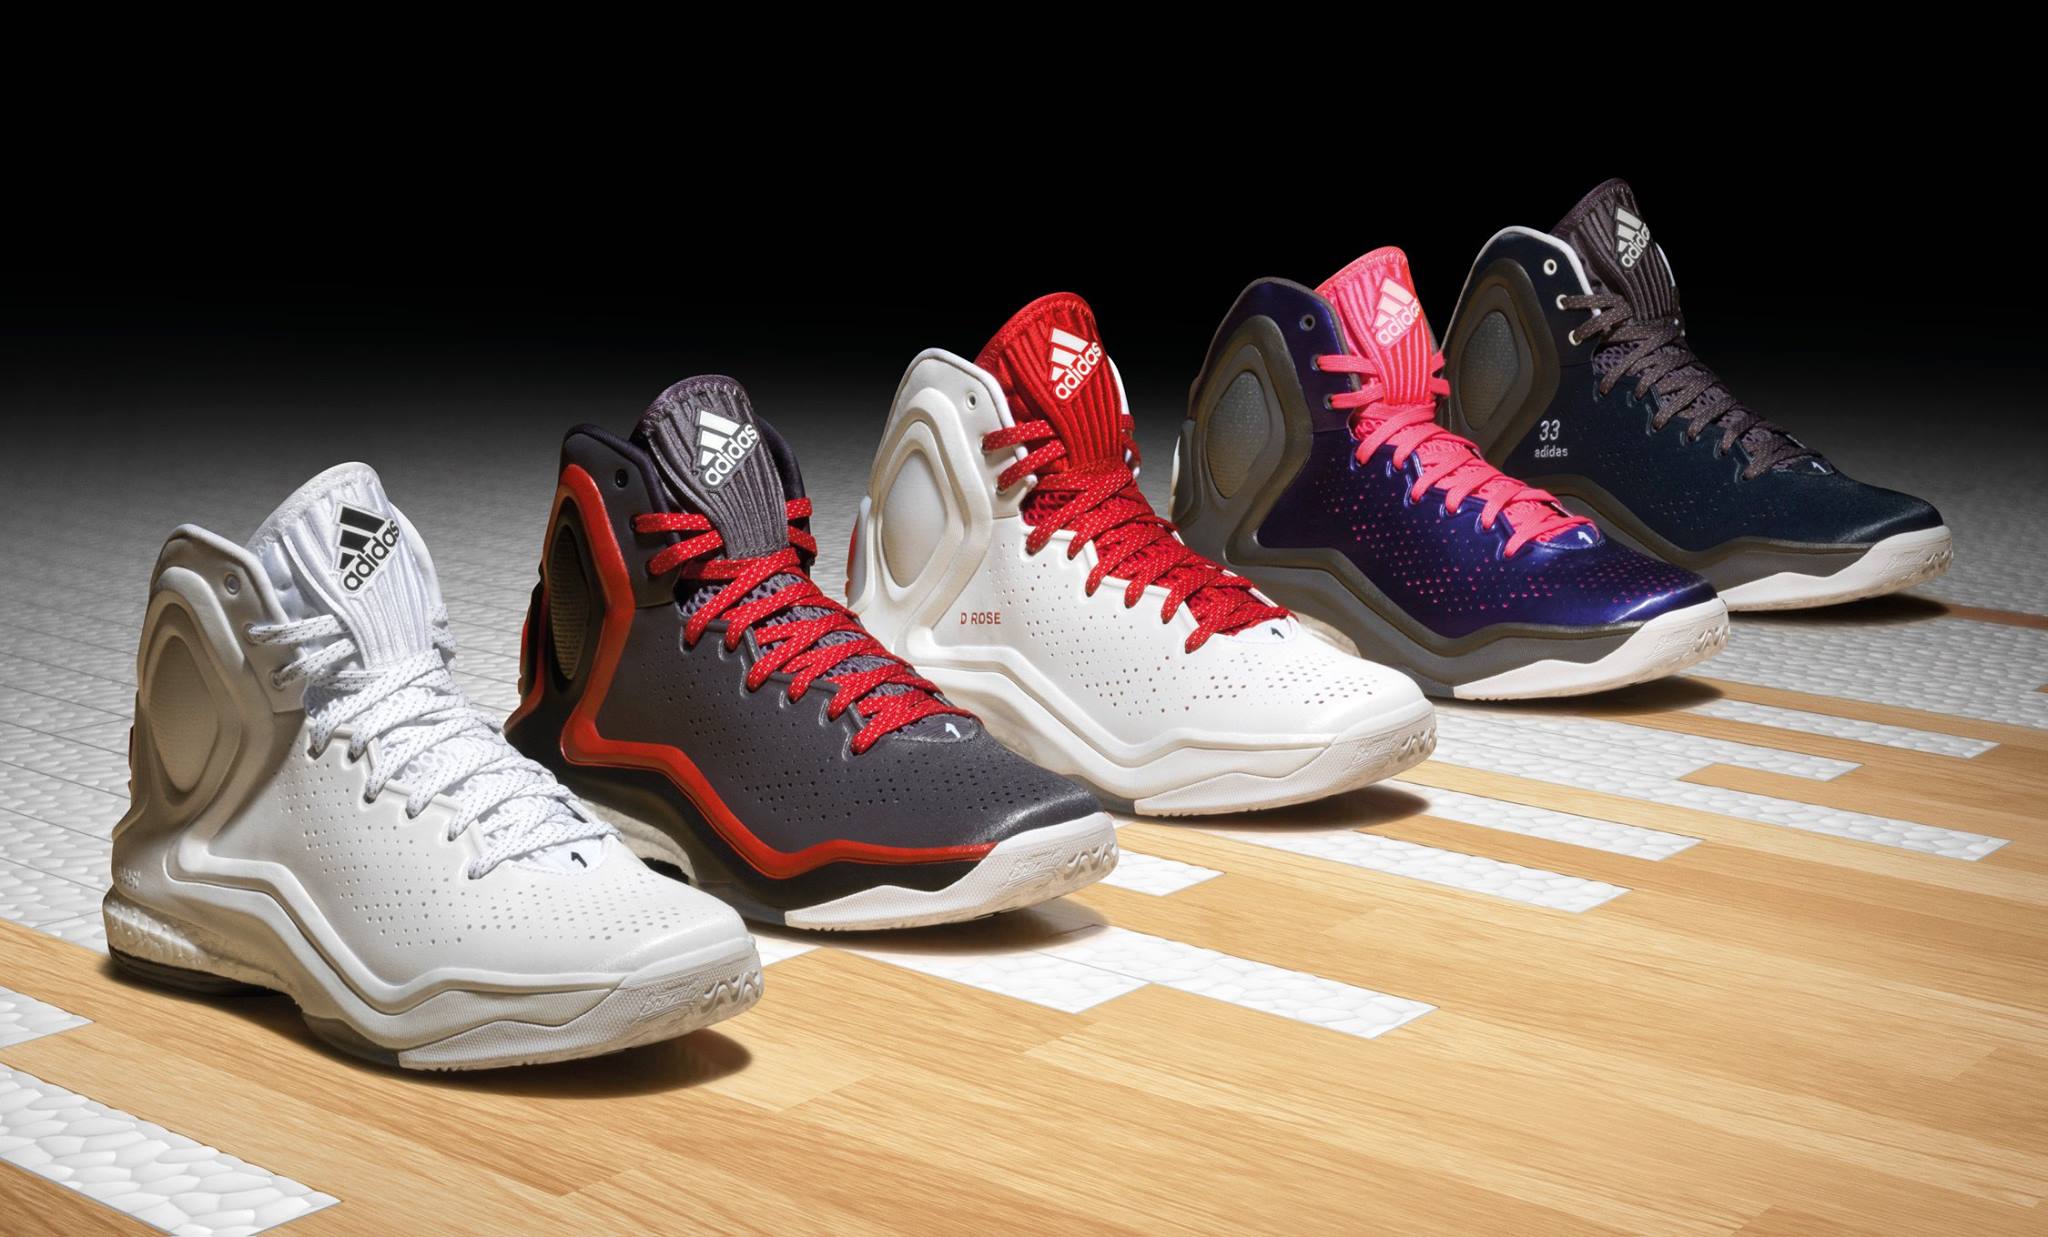 mi adidas D Rose 5.0 - Available Now 